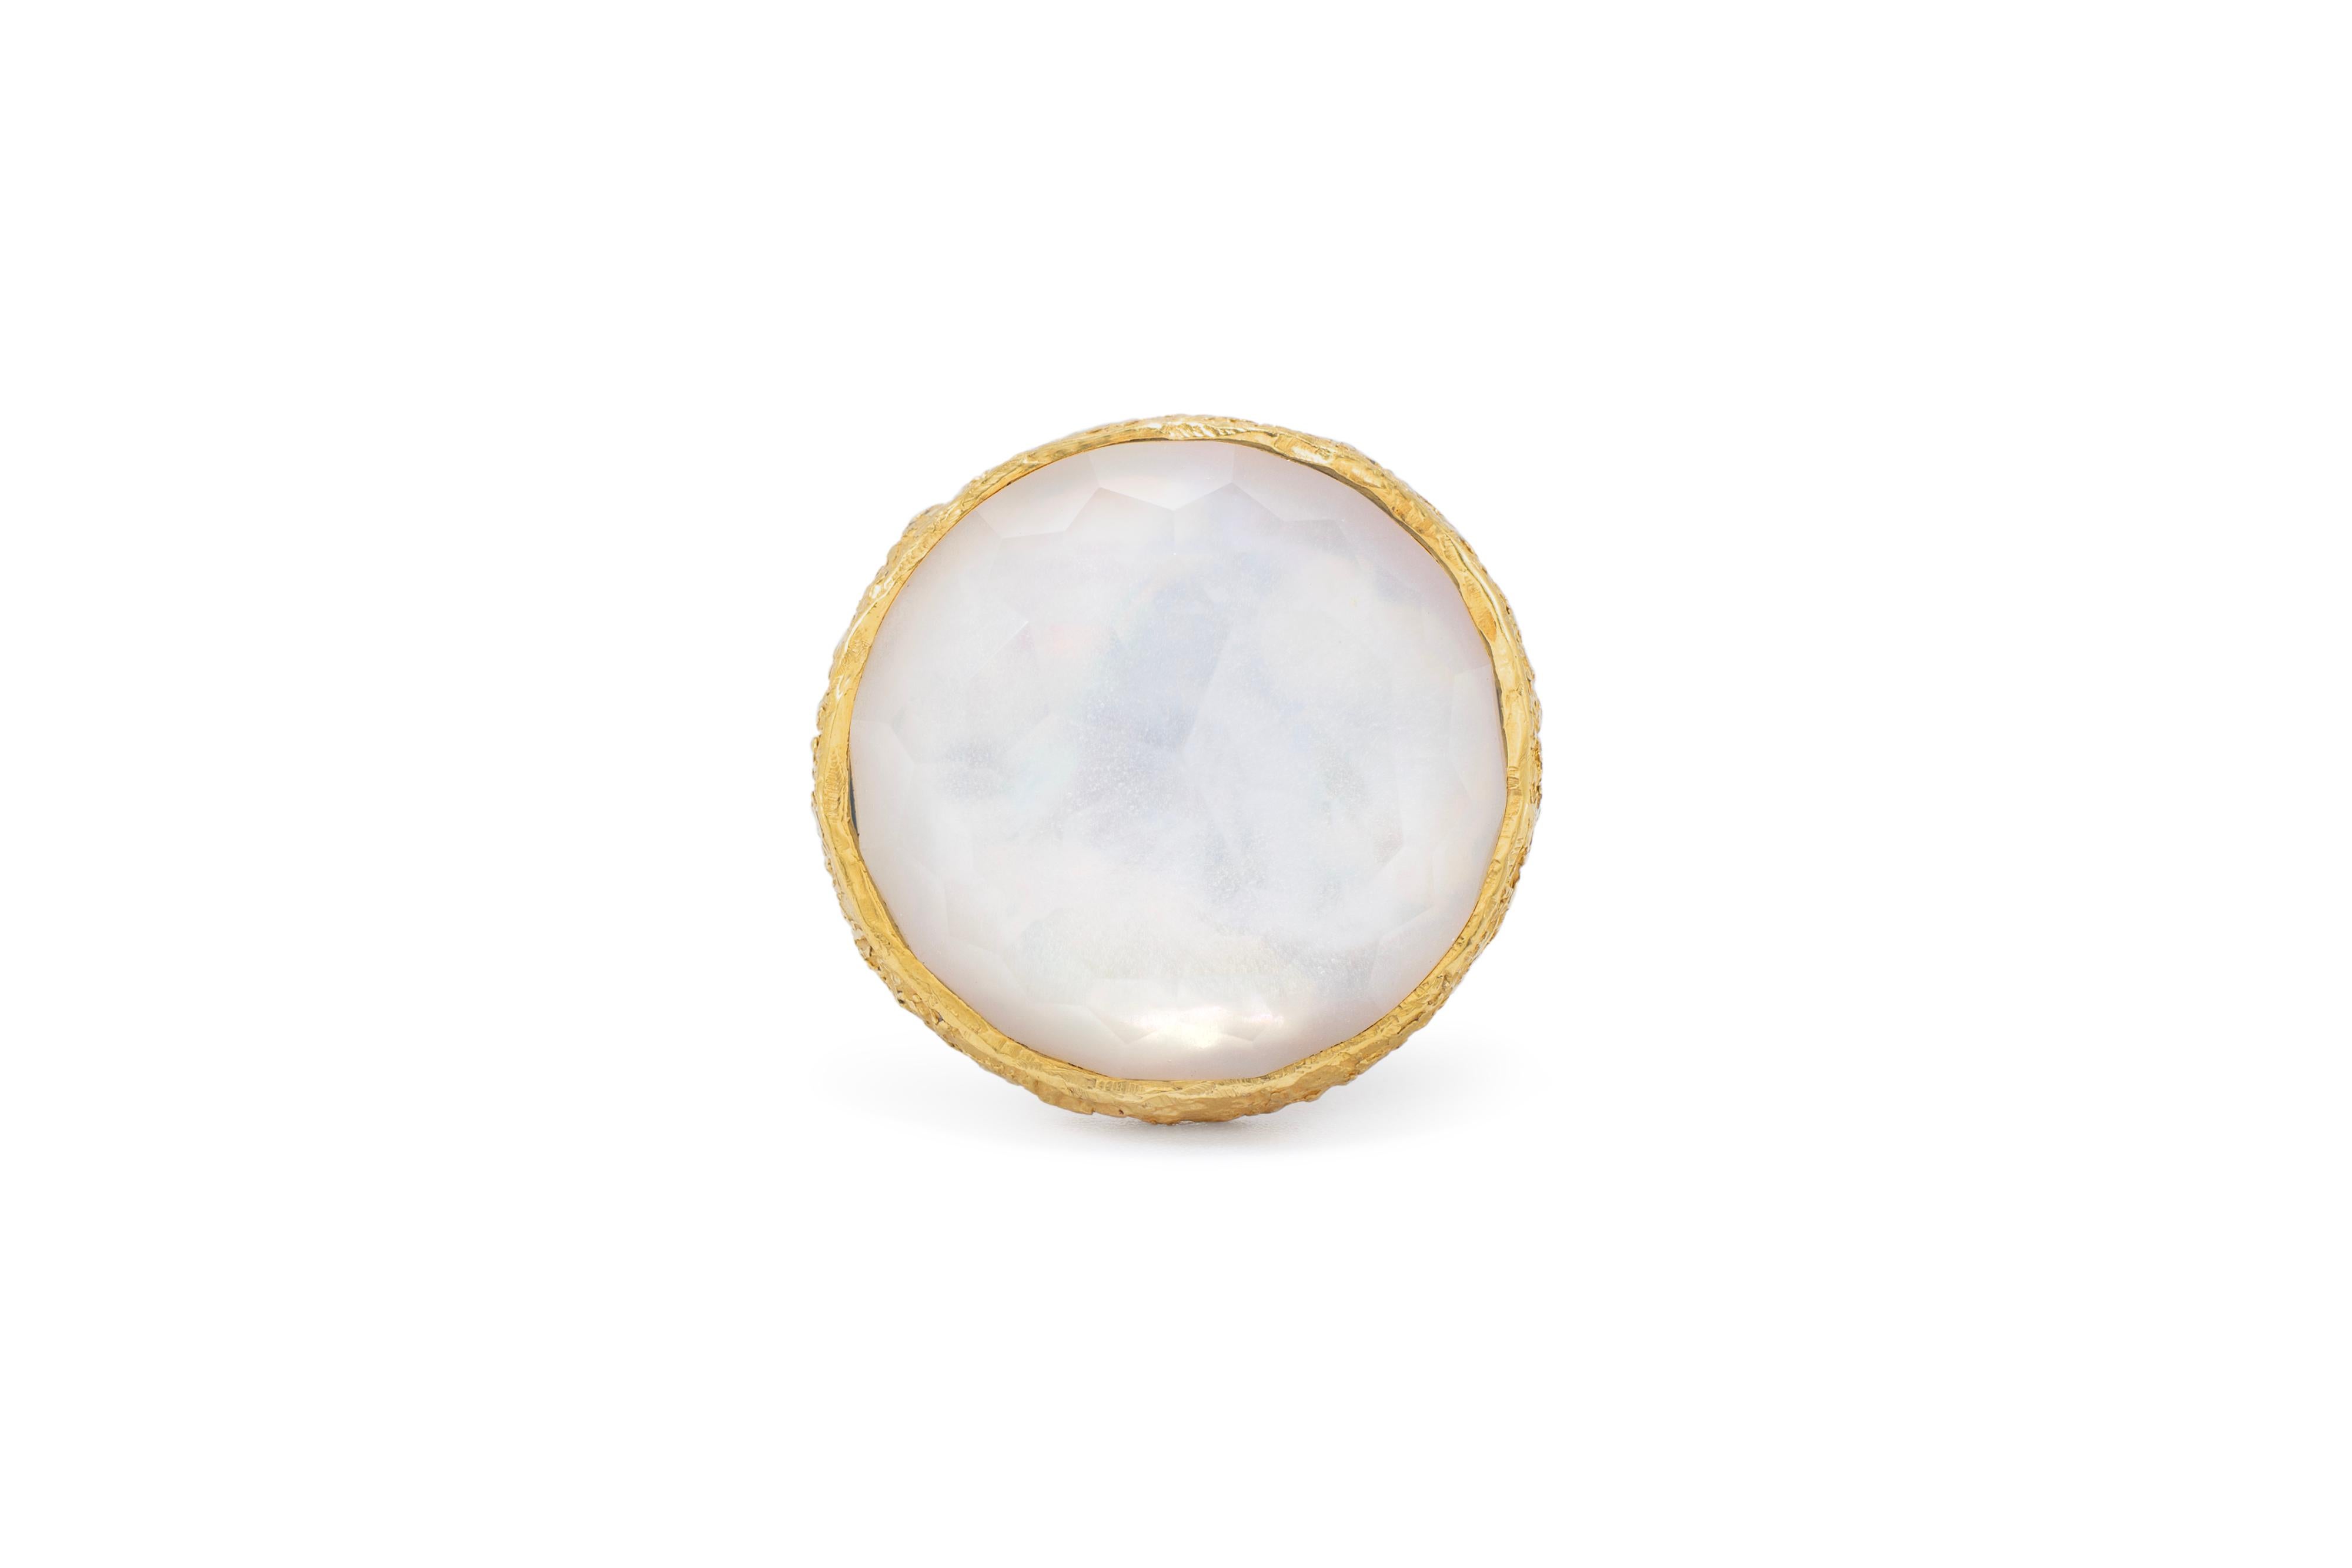 Angelic Pearl and Crystal Cocktail Ring in 22k Gold, by Tagili For Sale